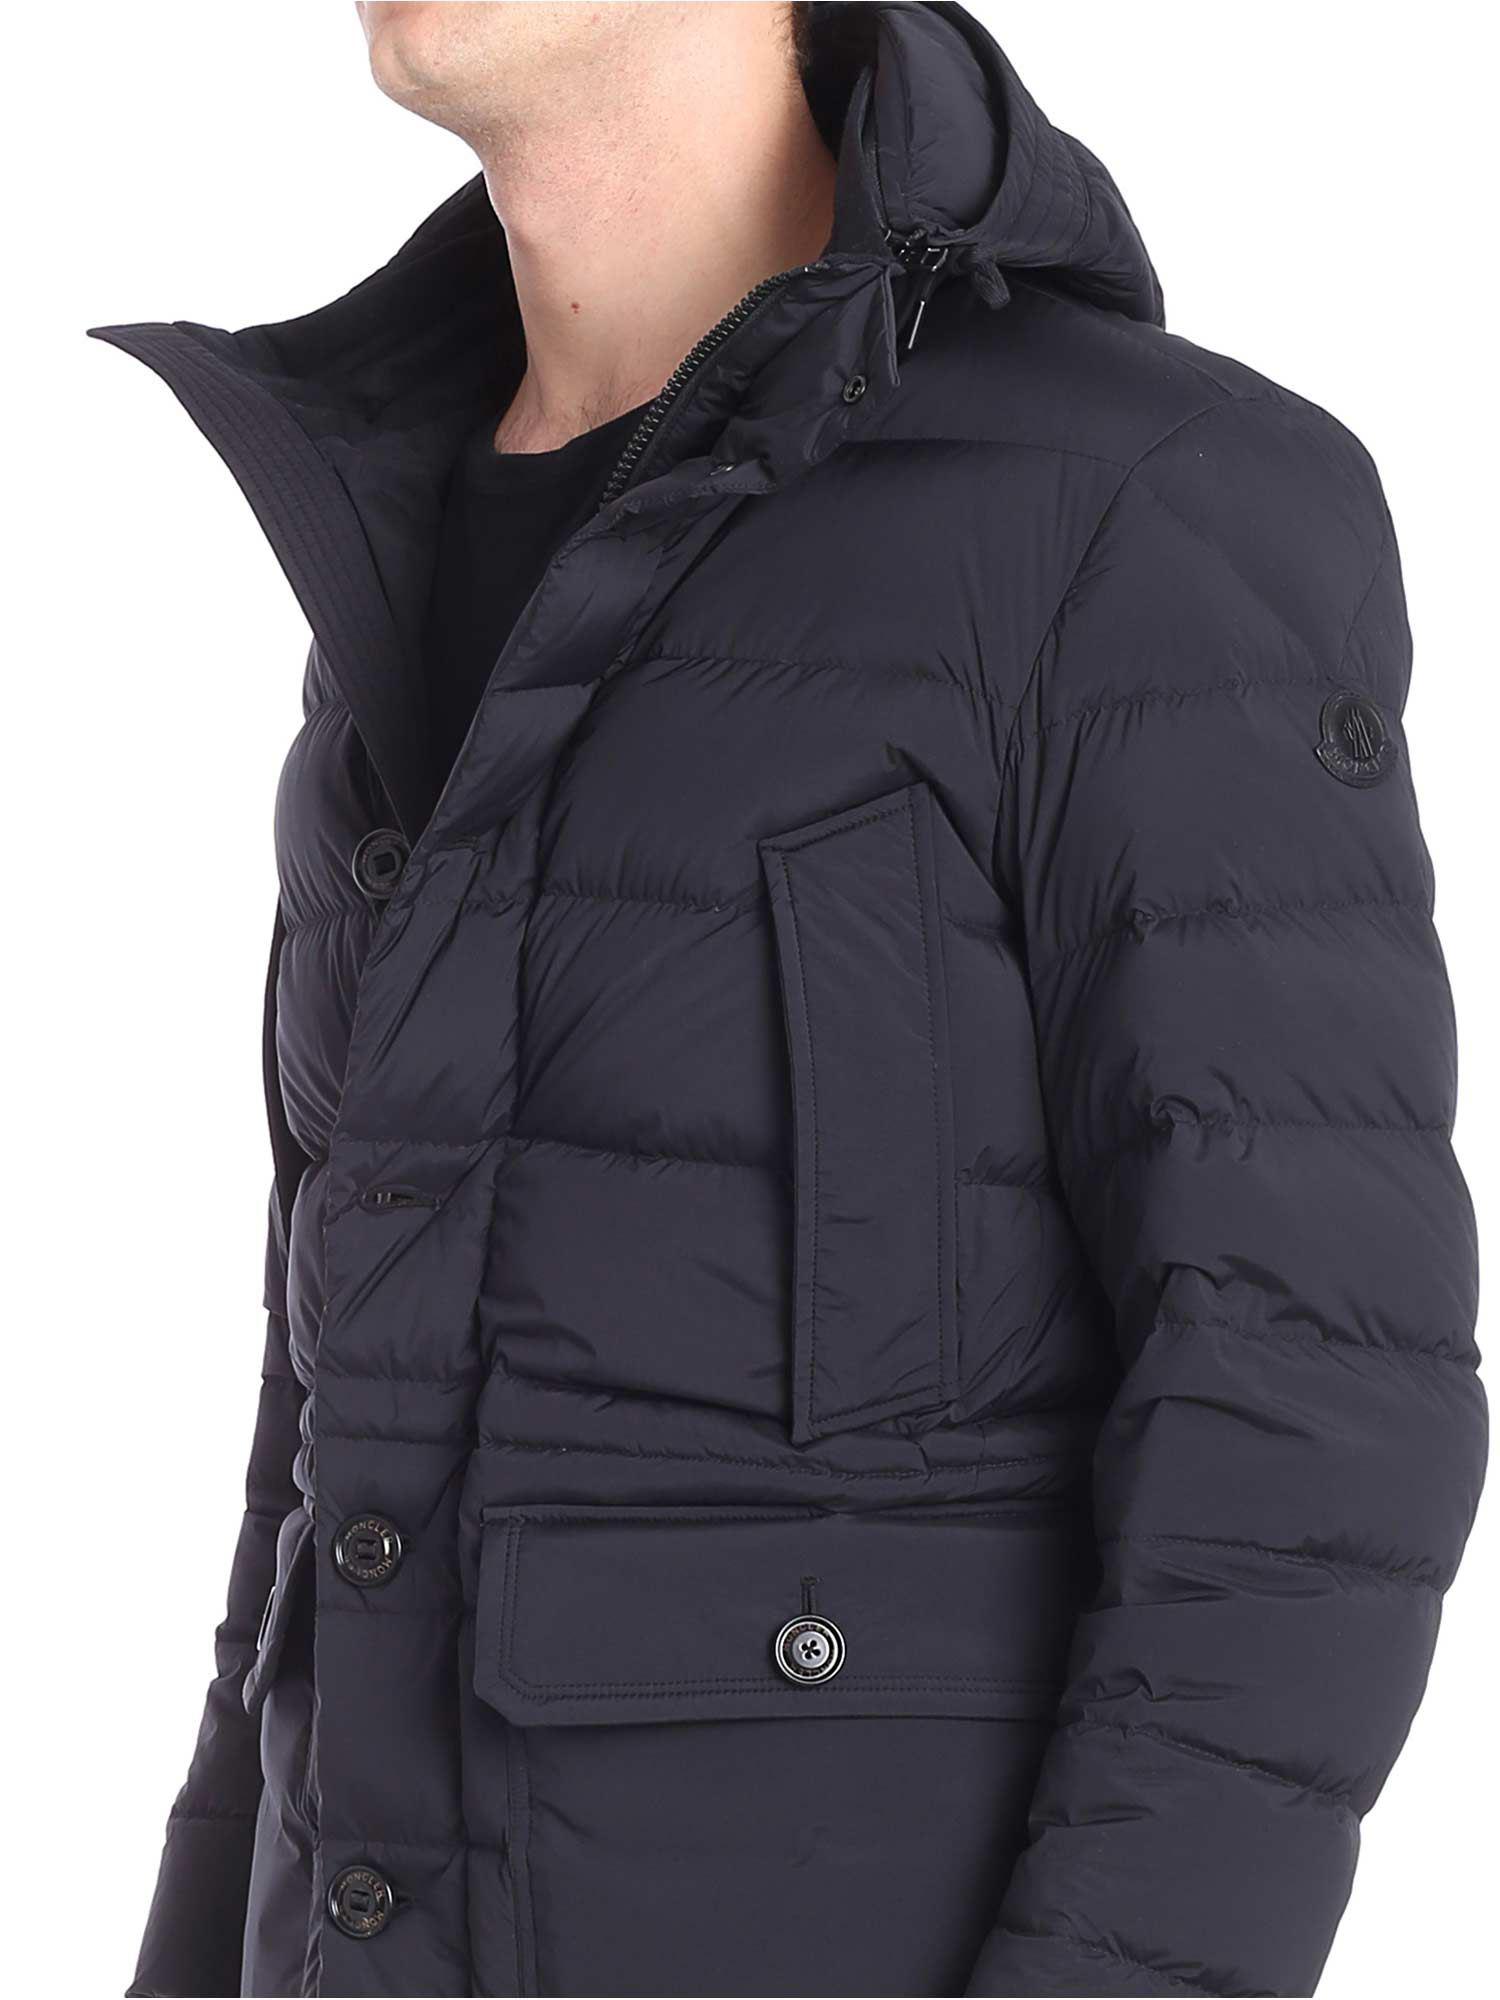 Moncler Leather Black Quilted Reims Down Jacket for Men - Lyst